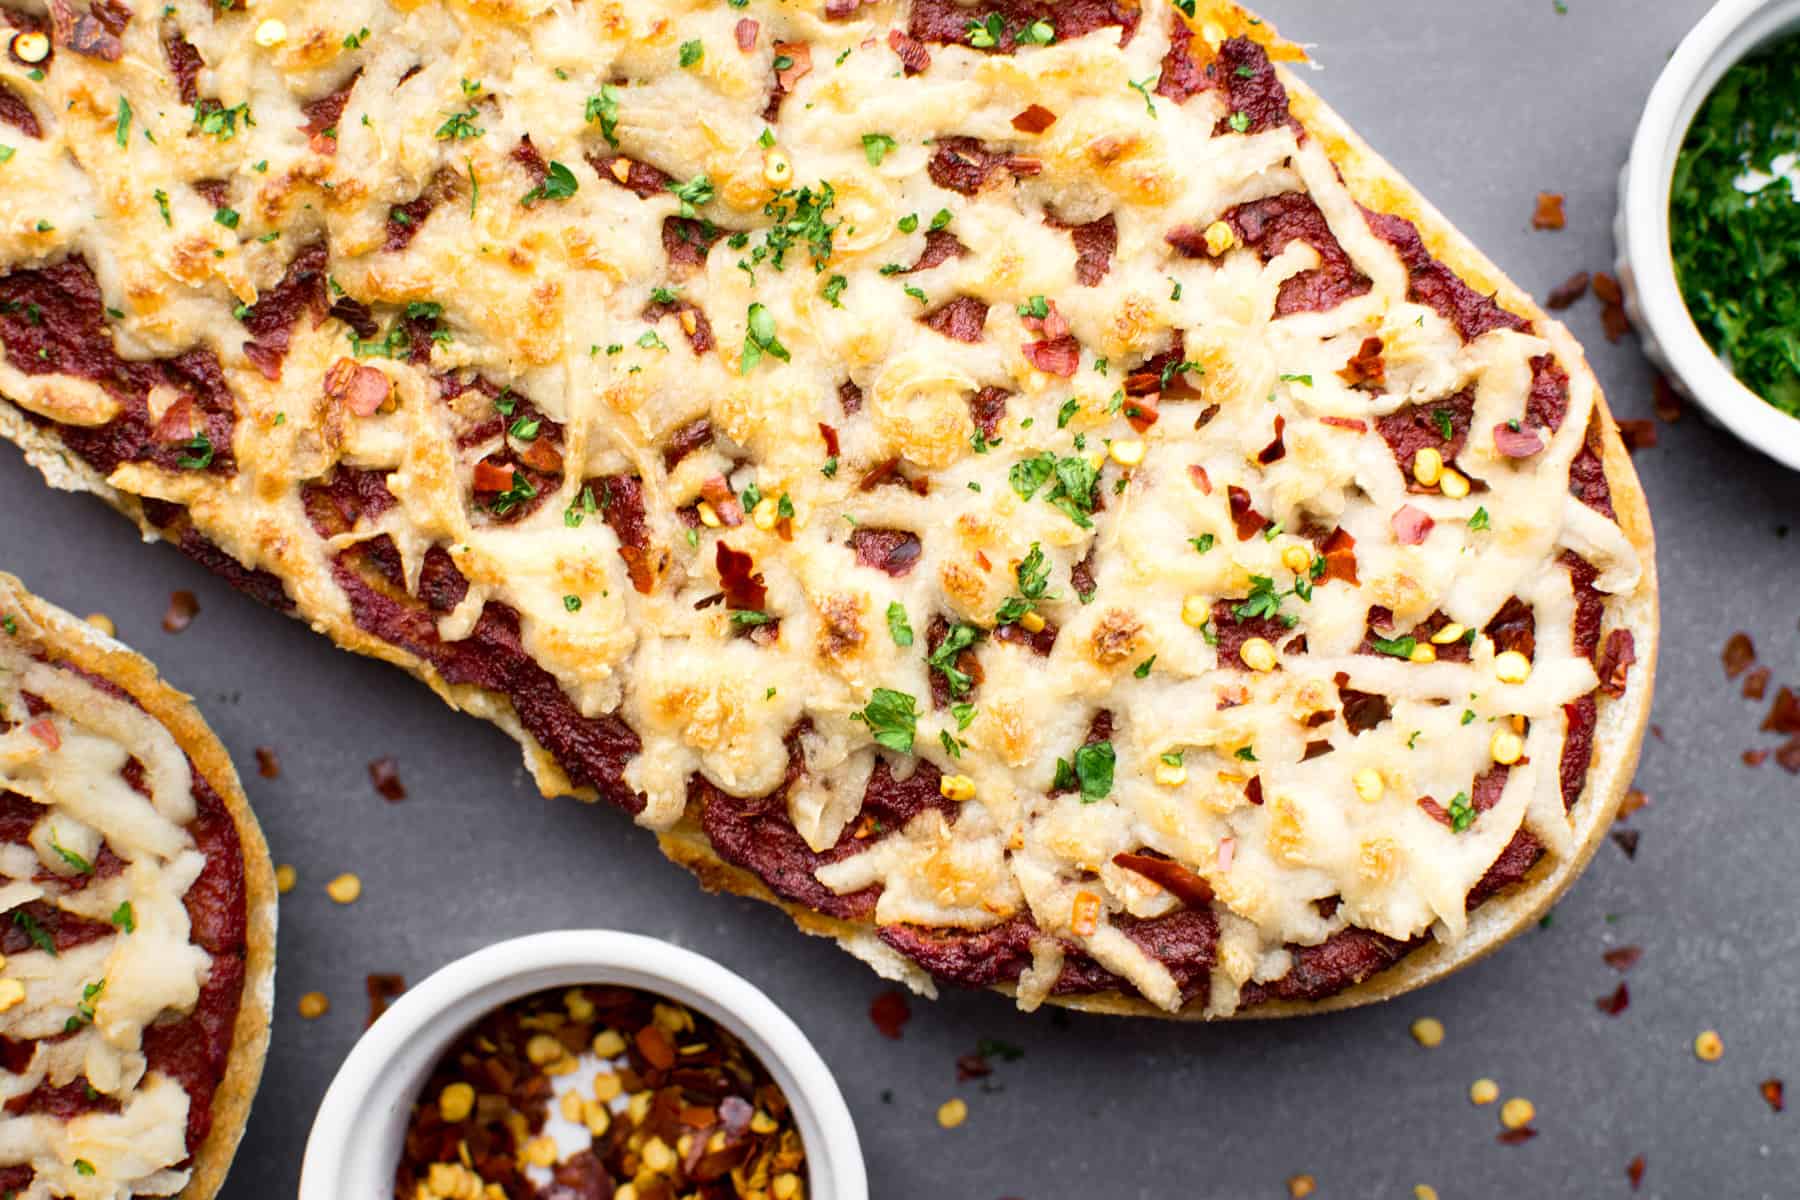 Vegan French bread pizza topped with cheese.